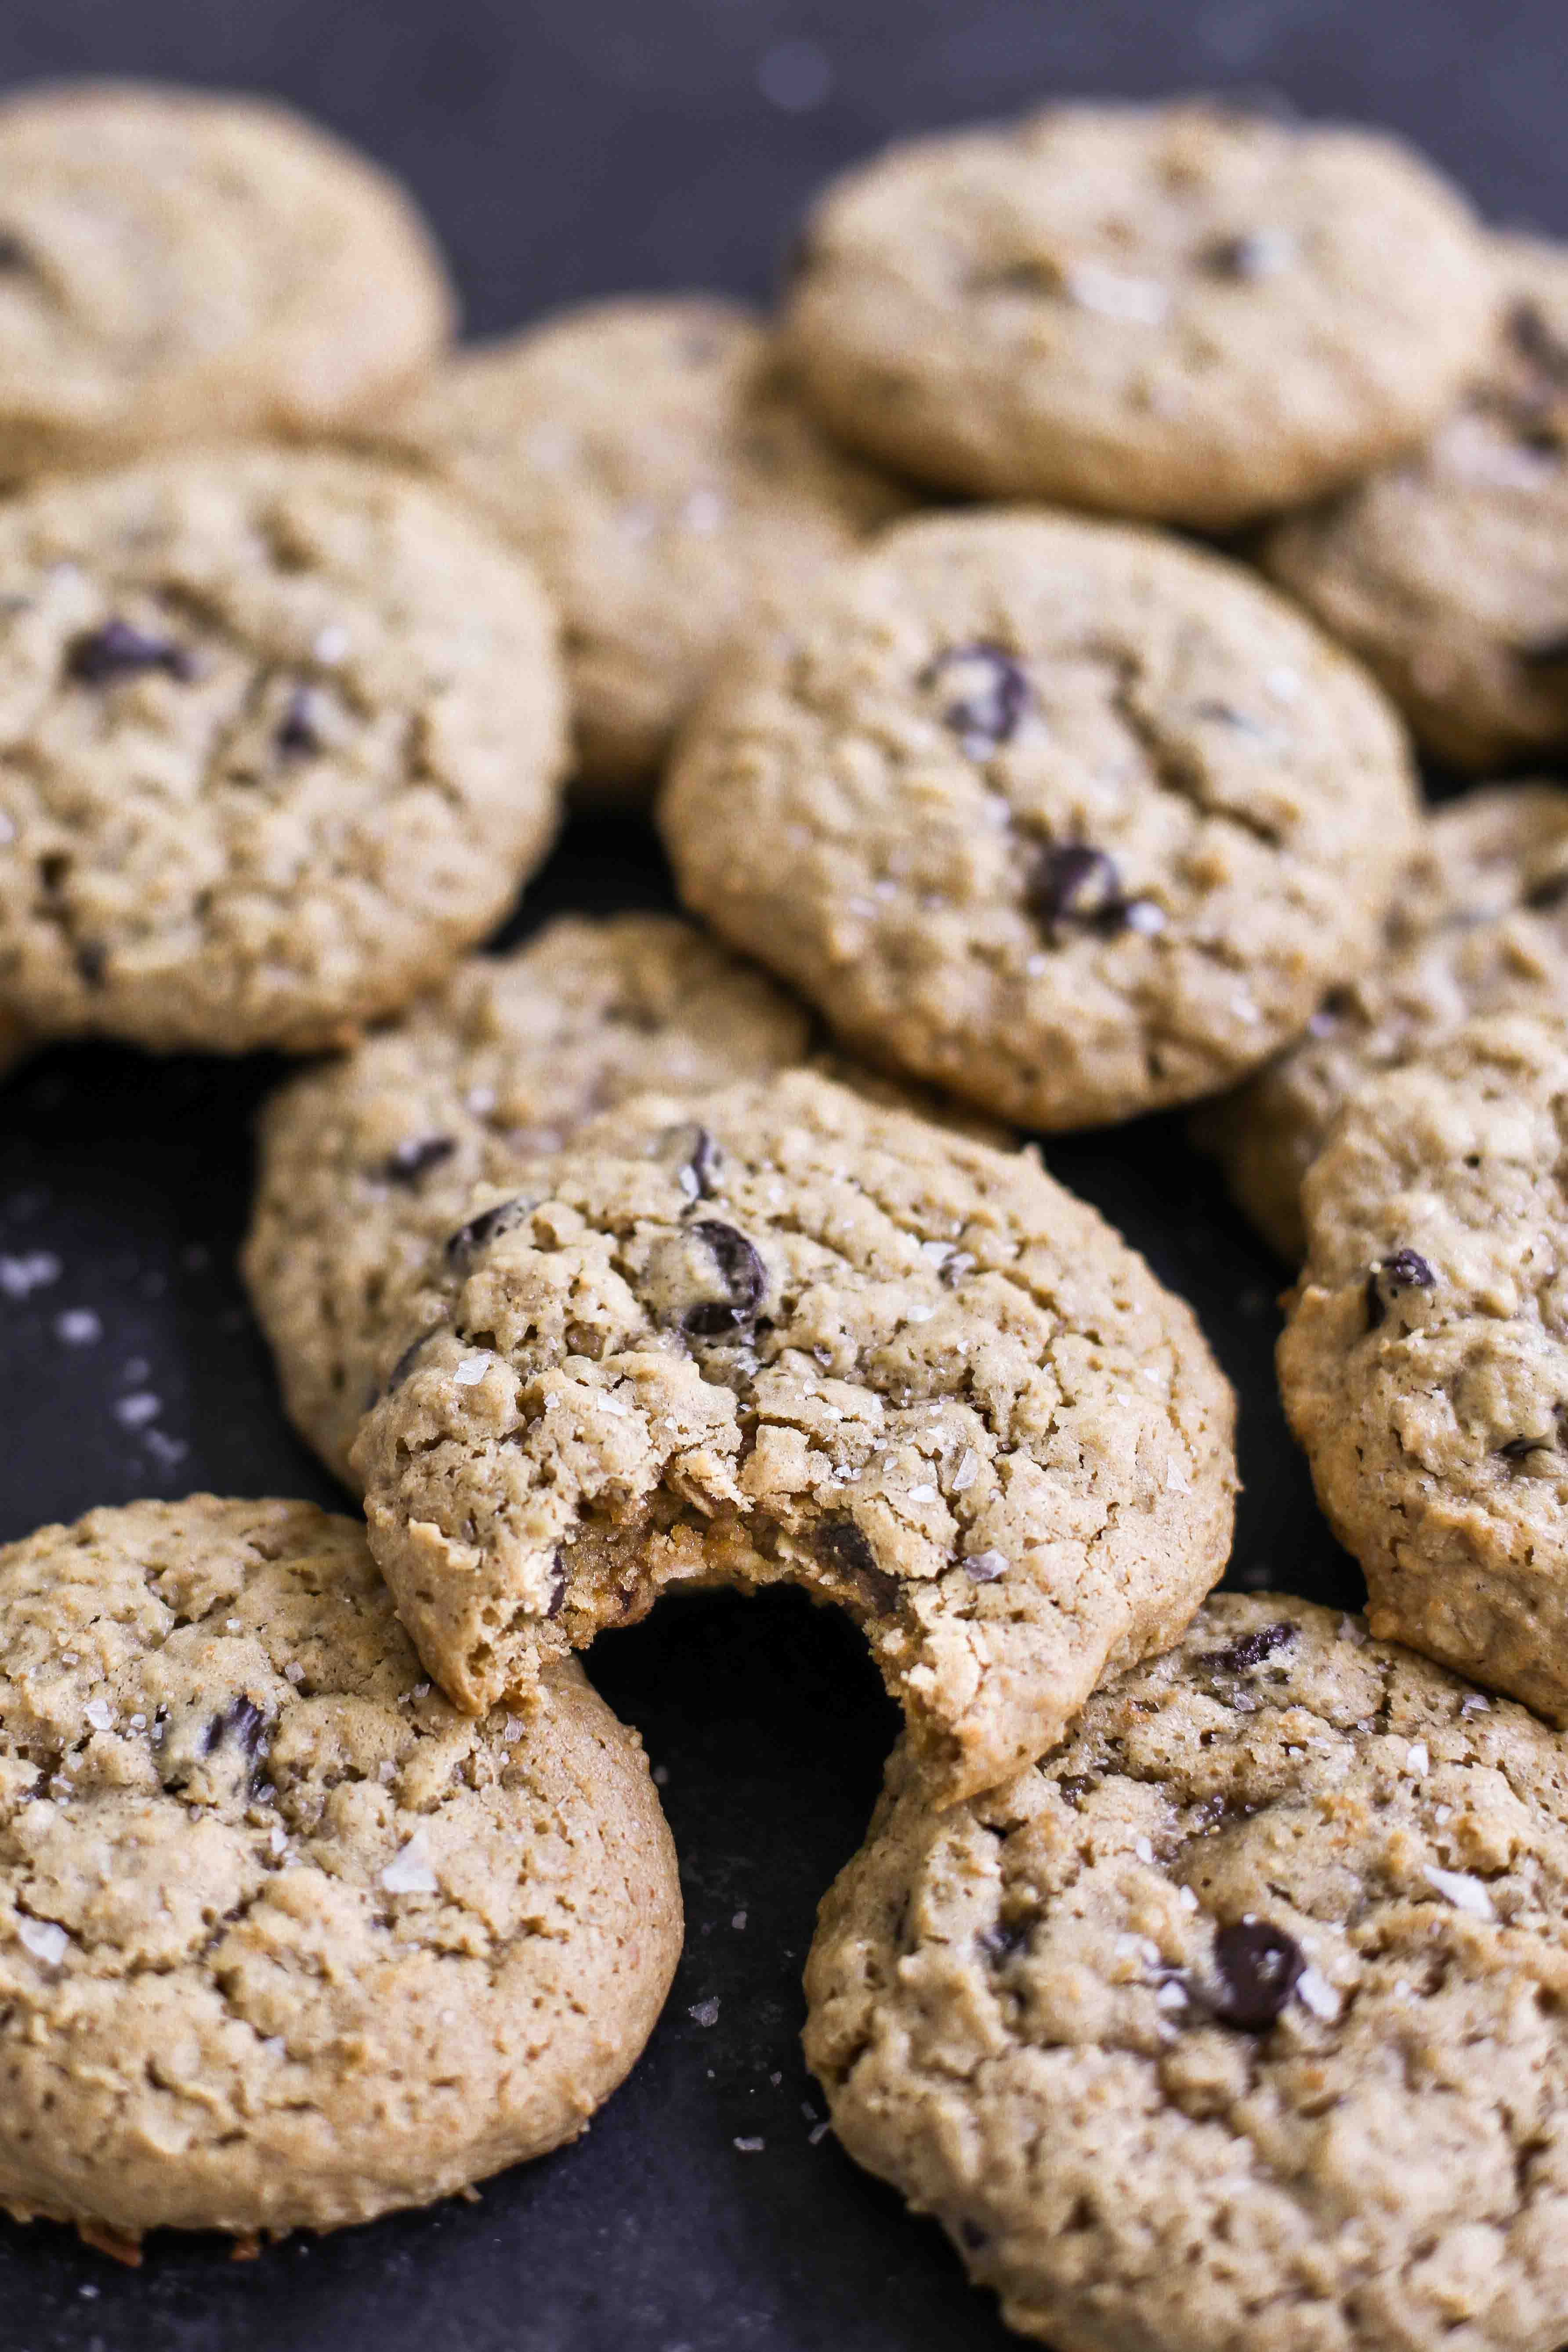 These dairy-free, gluten-free peanut butter chocolate chip oatmeal cookies are easy to make in one bowl and hard to stop eating!